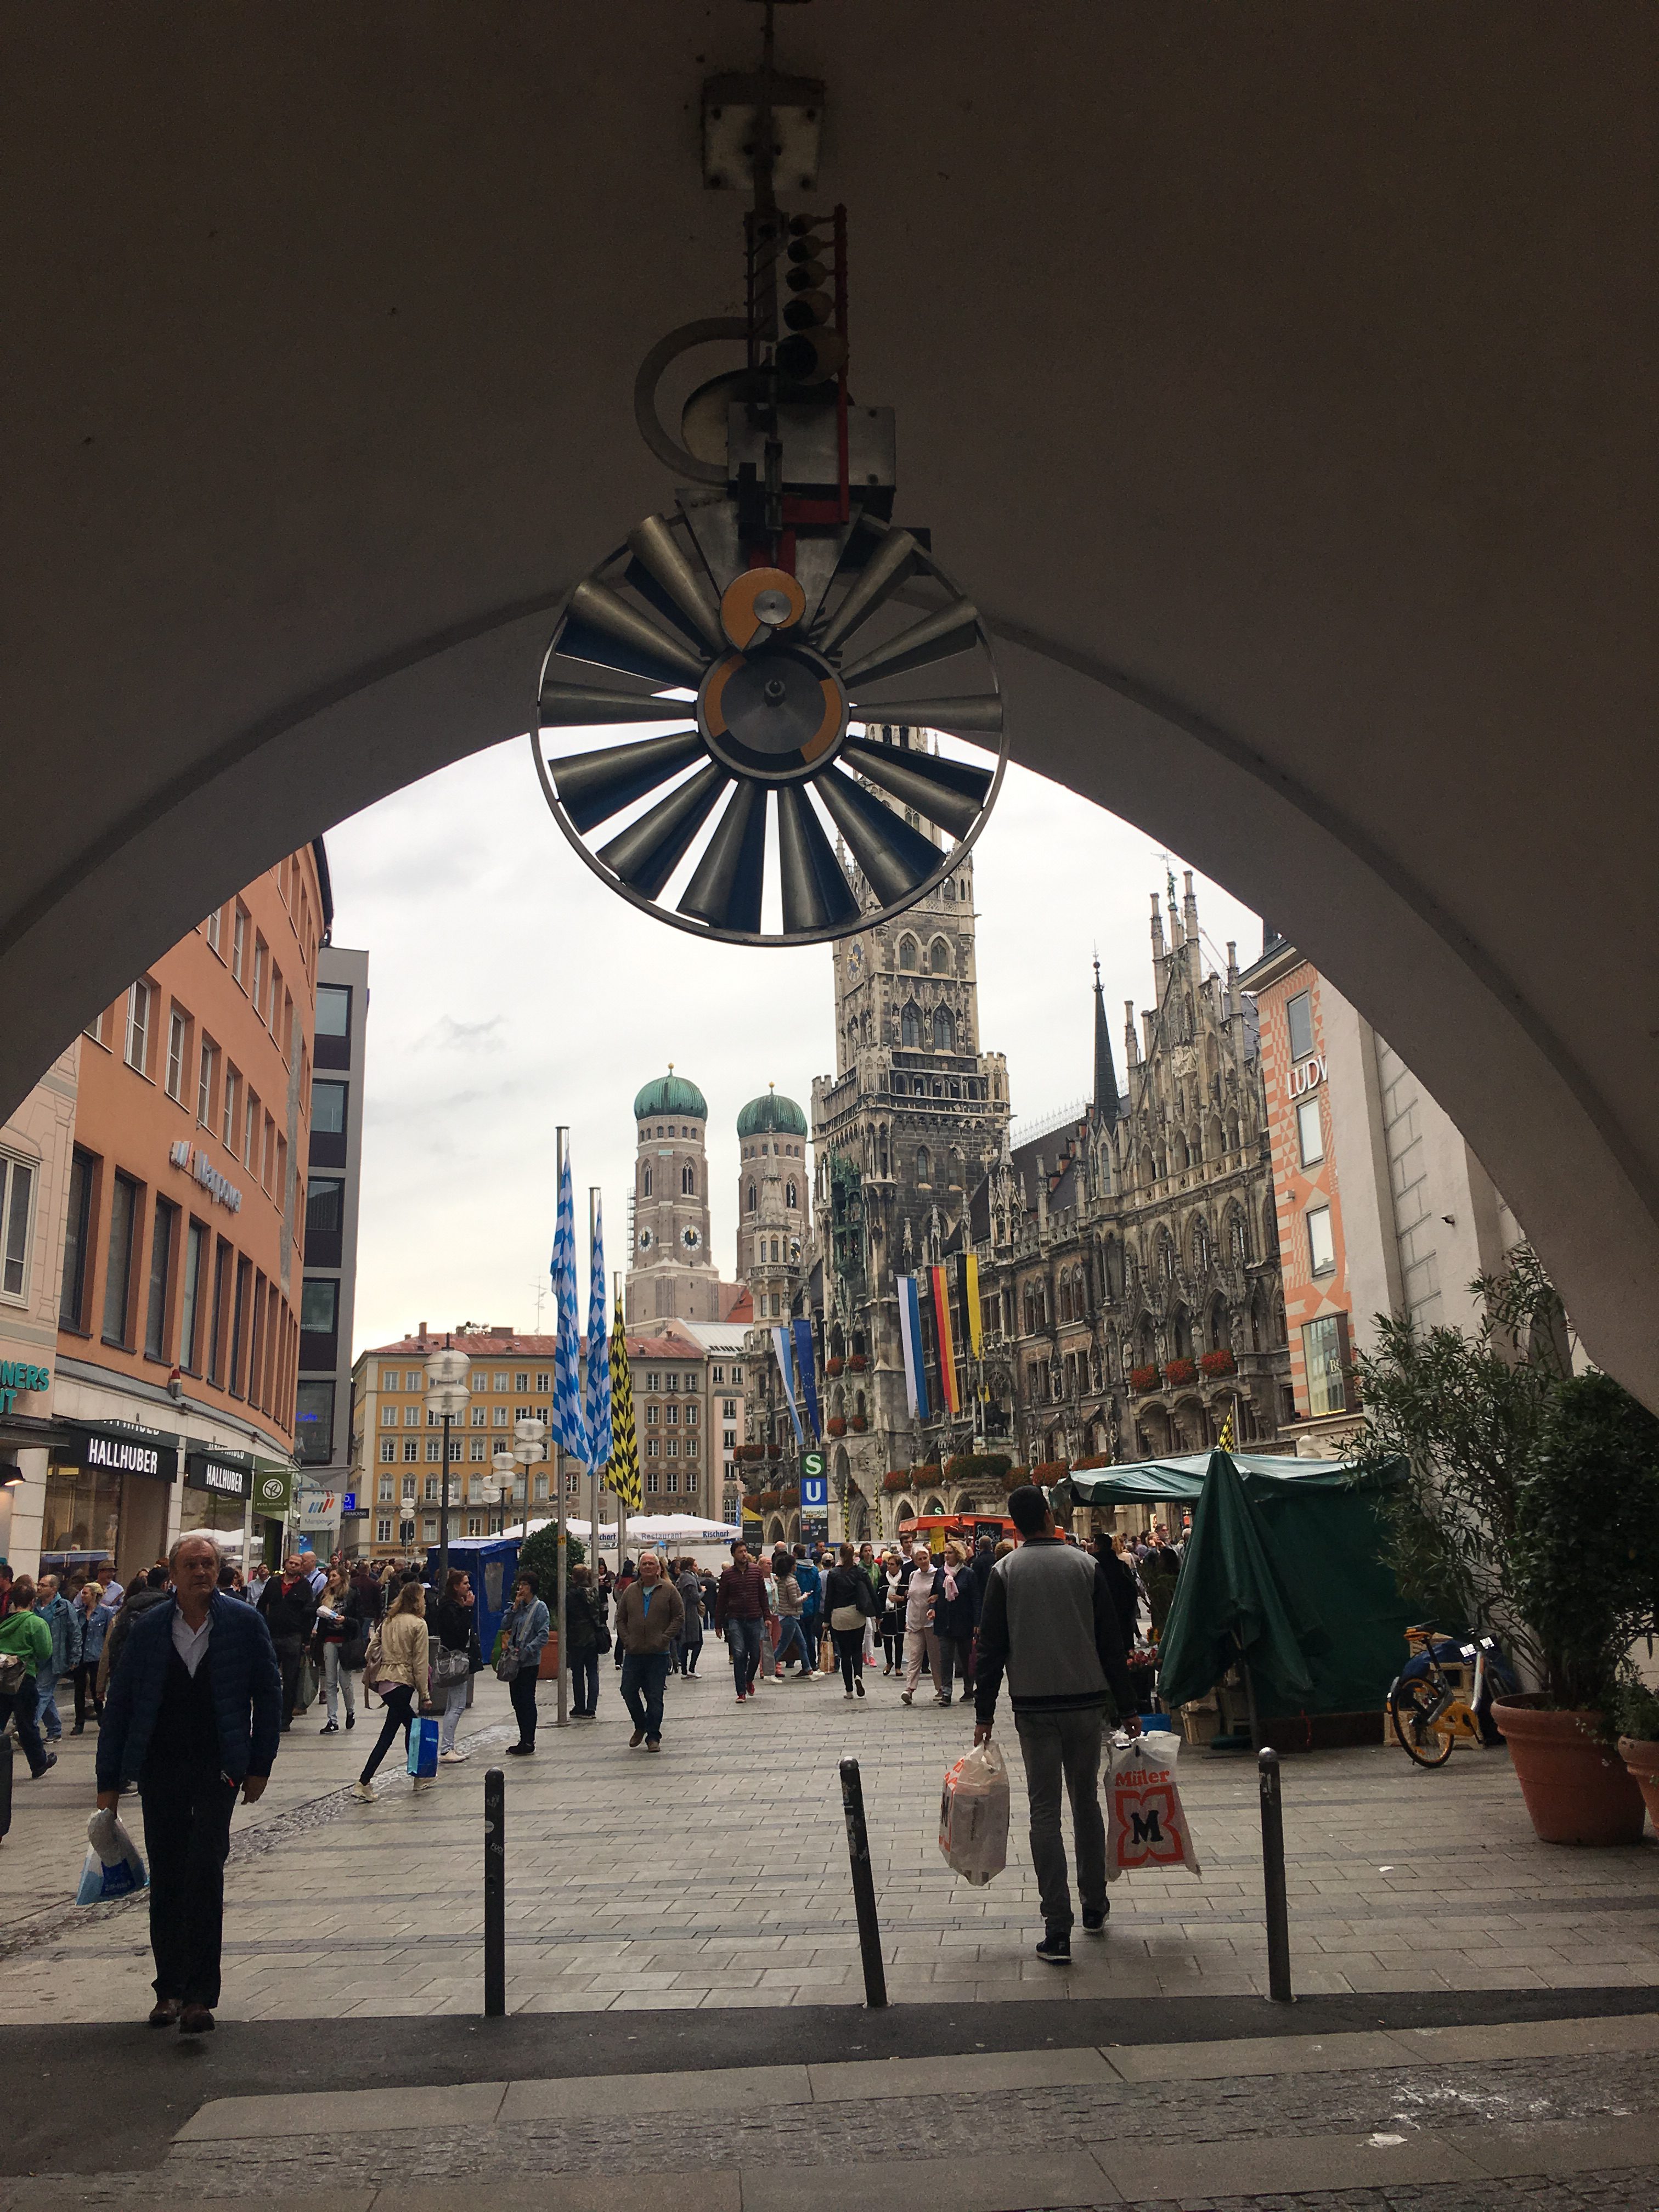 Wandering the streets of Munich